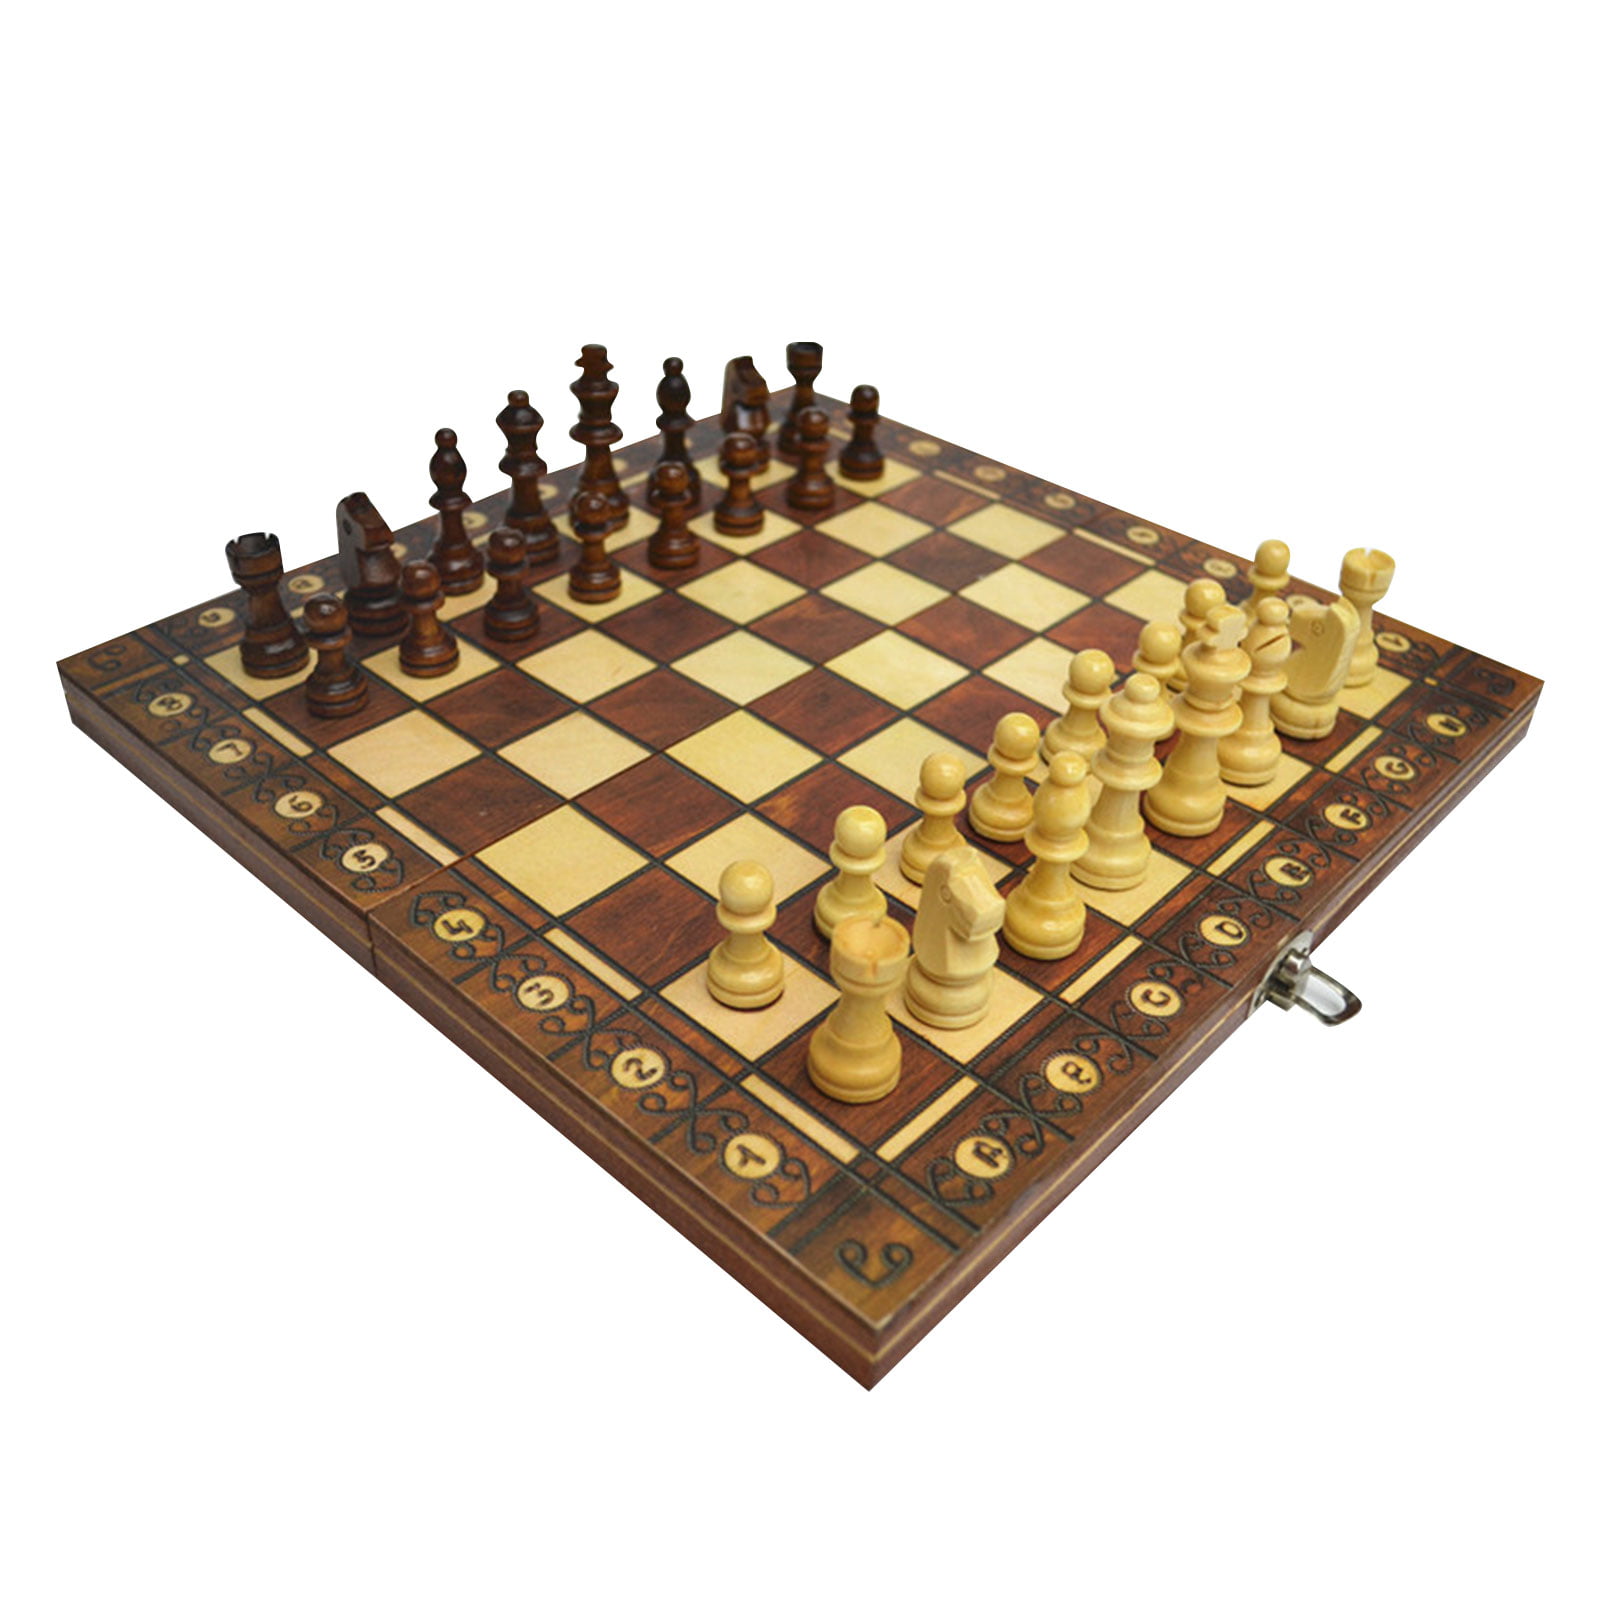 Details about   Wooden Folding Chess Board Game A gift for women and men FREE SHIPPING NEW 